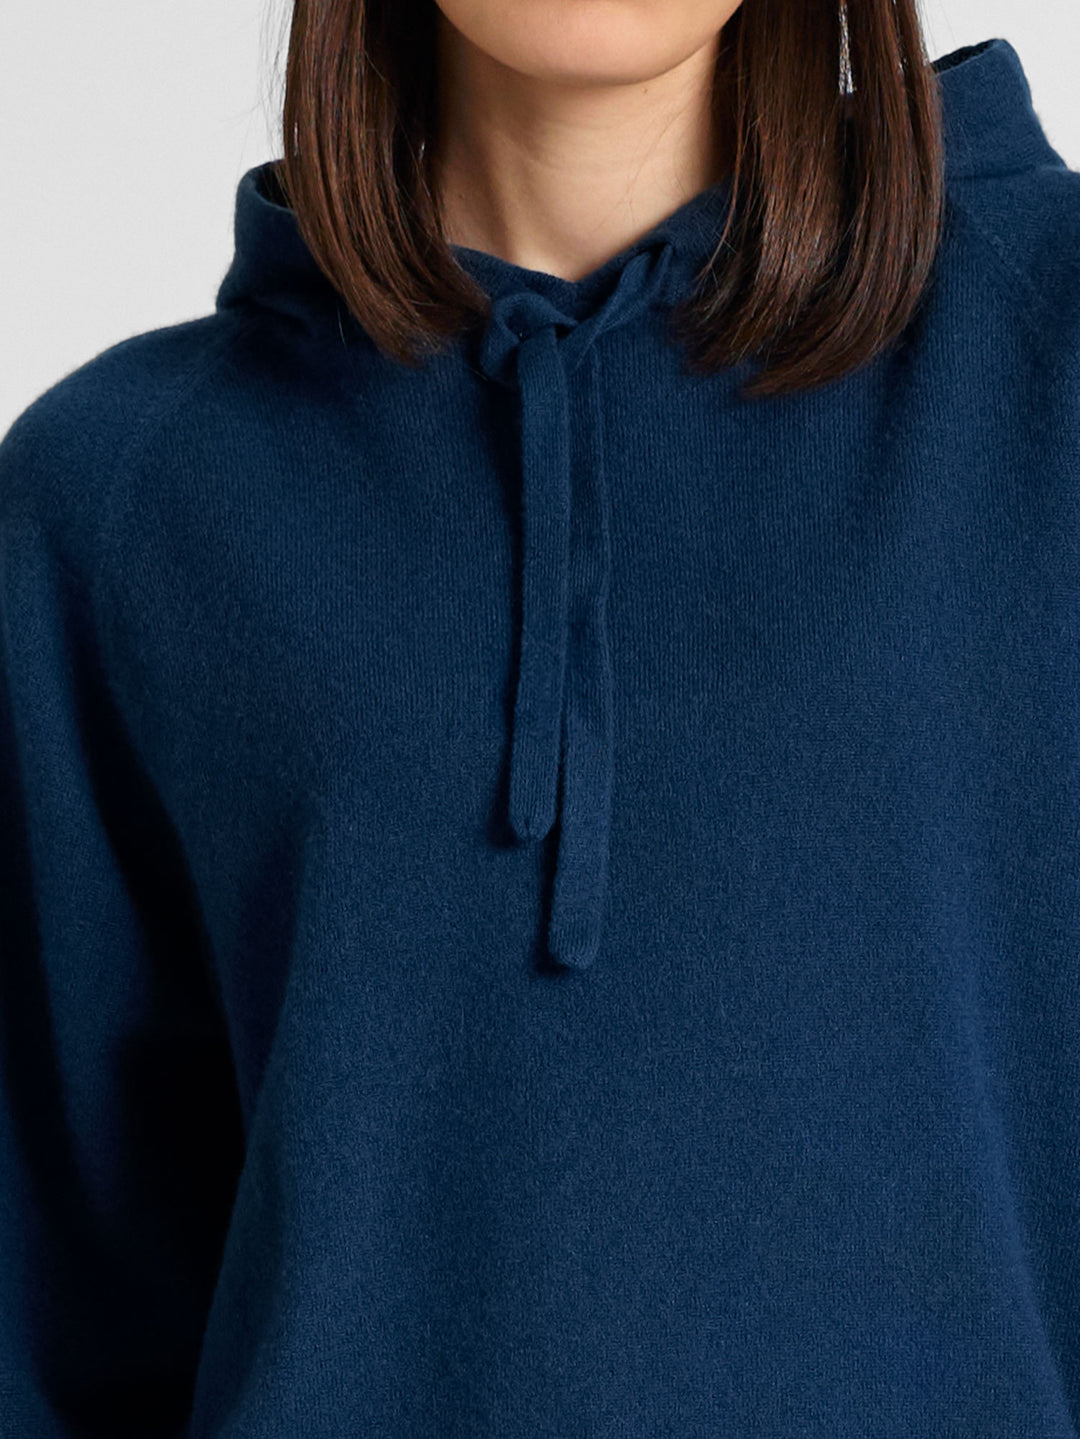 Cashmere hoodie "Lux Hoodie" in 100% pure cashmere. Scandinavian design by Kashmina. Color: Mountain Blue.